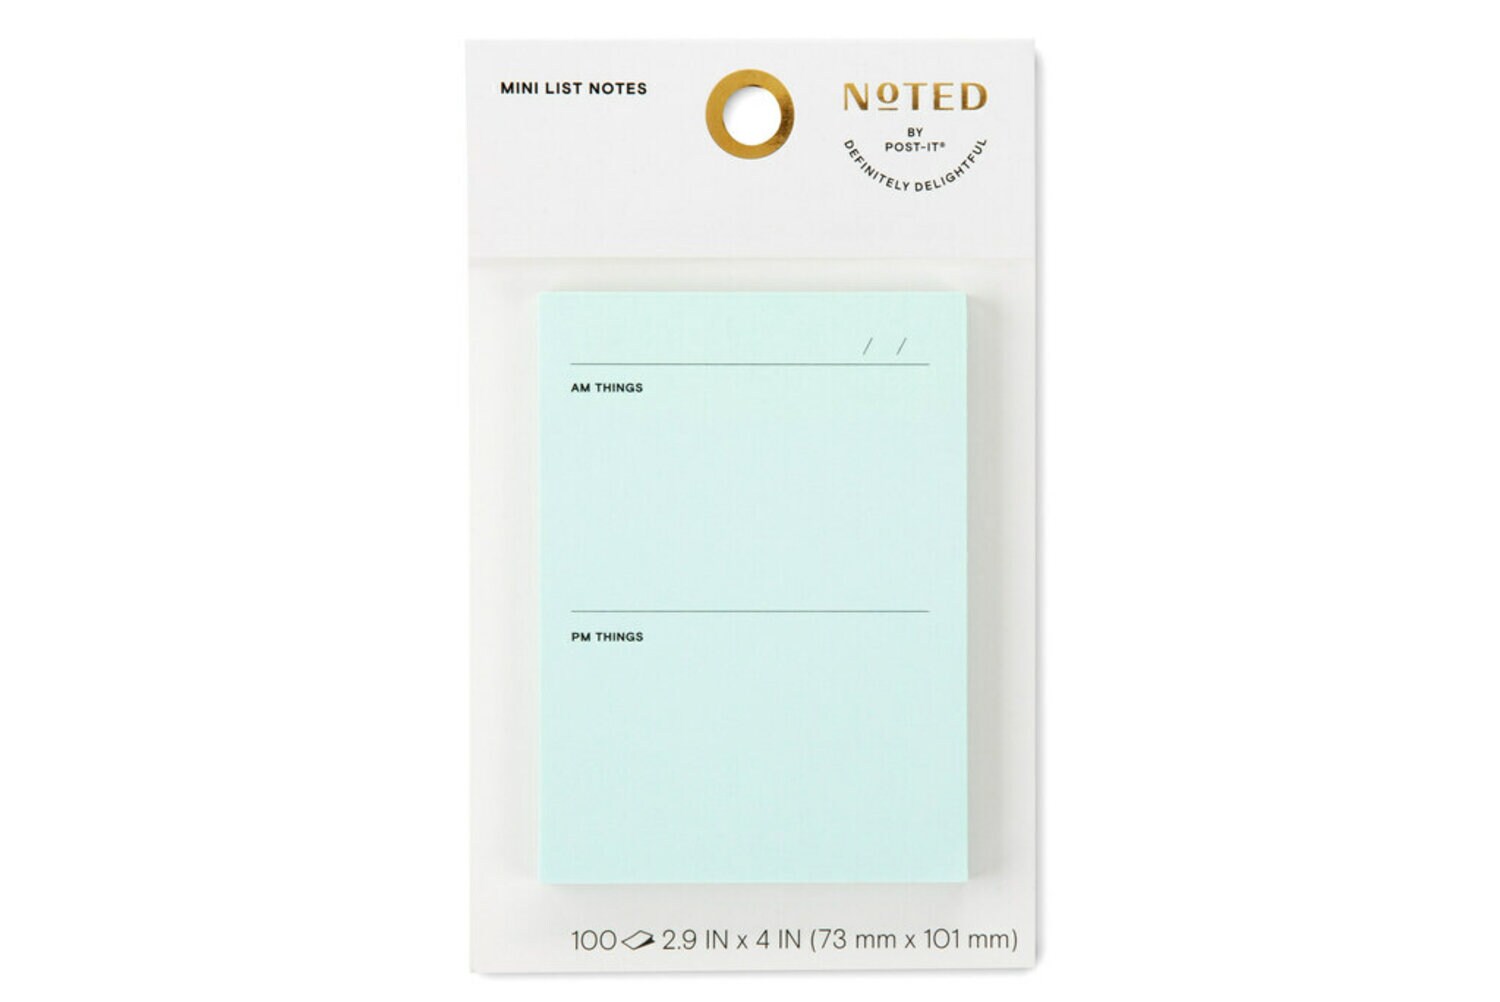 7100256436 - Post-it Printed Notes NTD-34-LGR, 4 in x 2.9 in (101 mm x 73 mm)